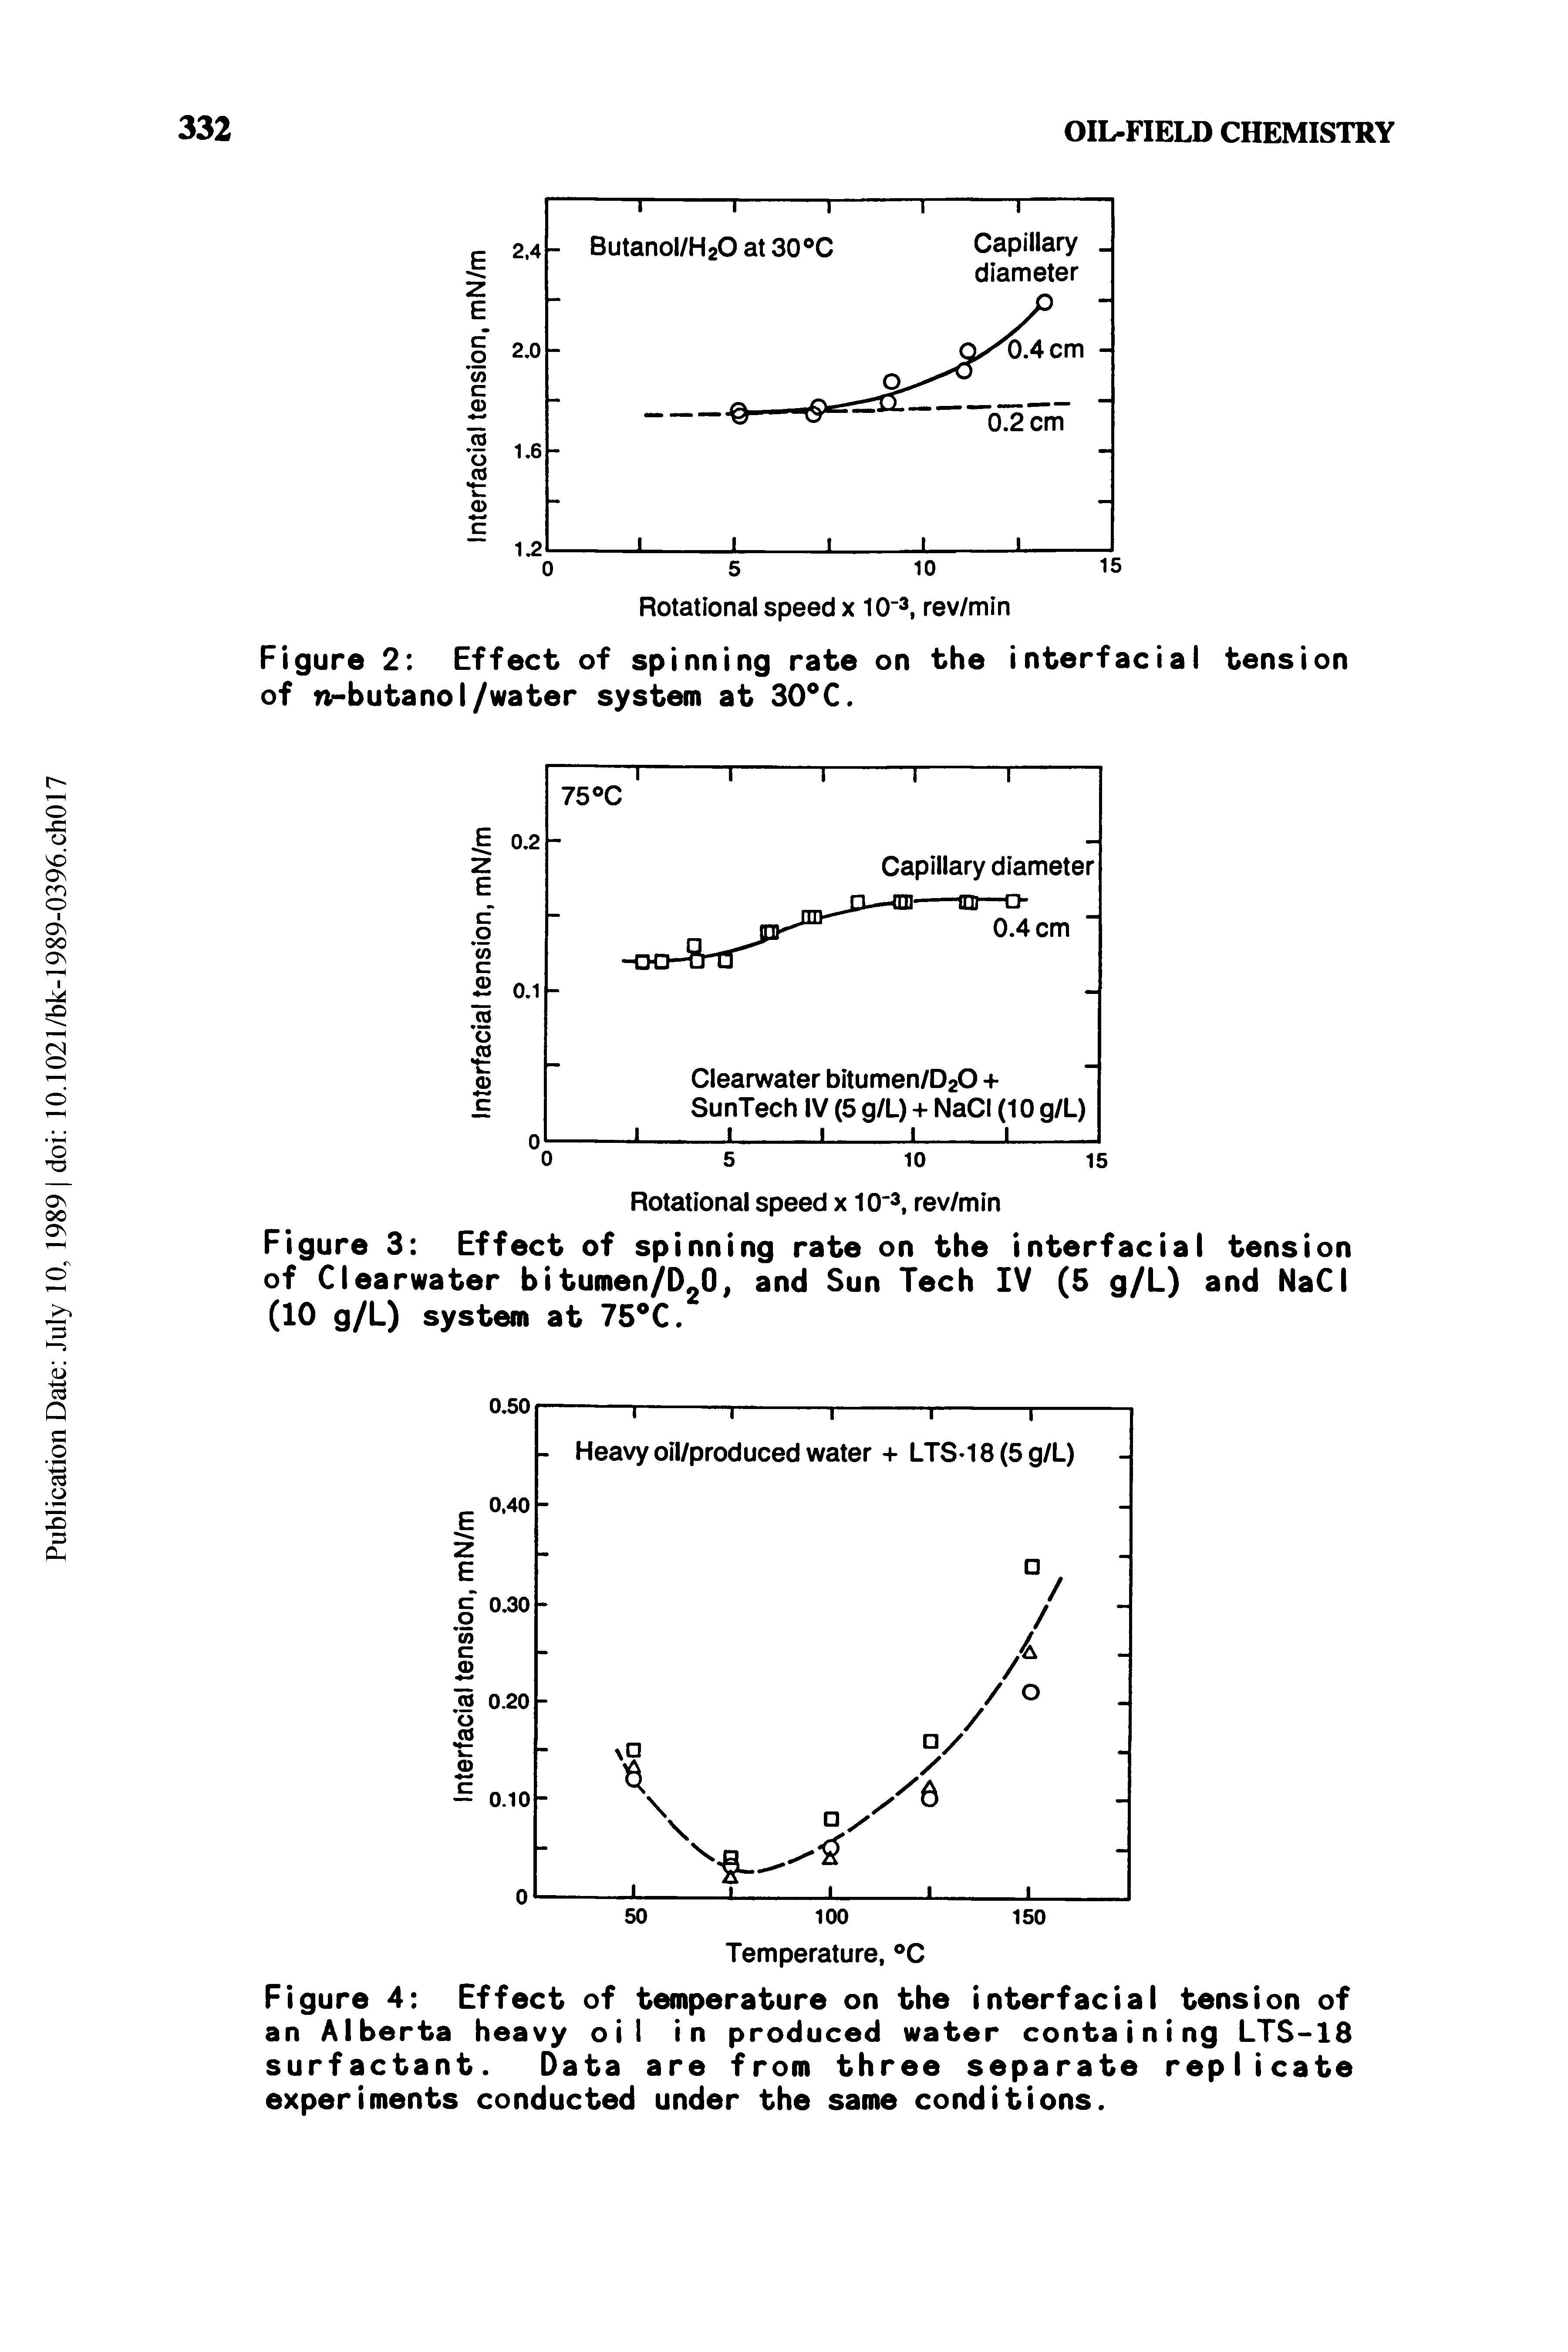 Figure 4 Effect of temperature on the interfacial tension of an Alberta heavy oil in produced water containing LTS-18 surfactant. Data are from three separate replicate experiments conducted under the same conditions.